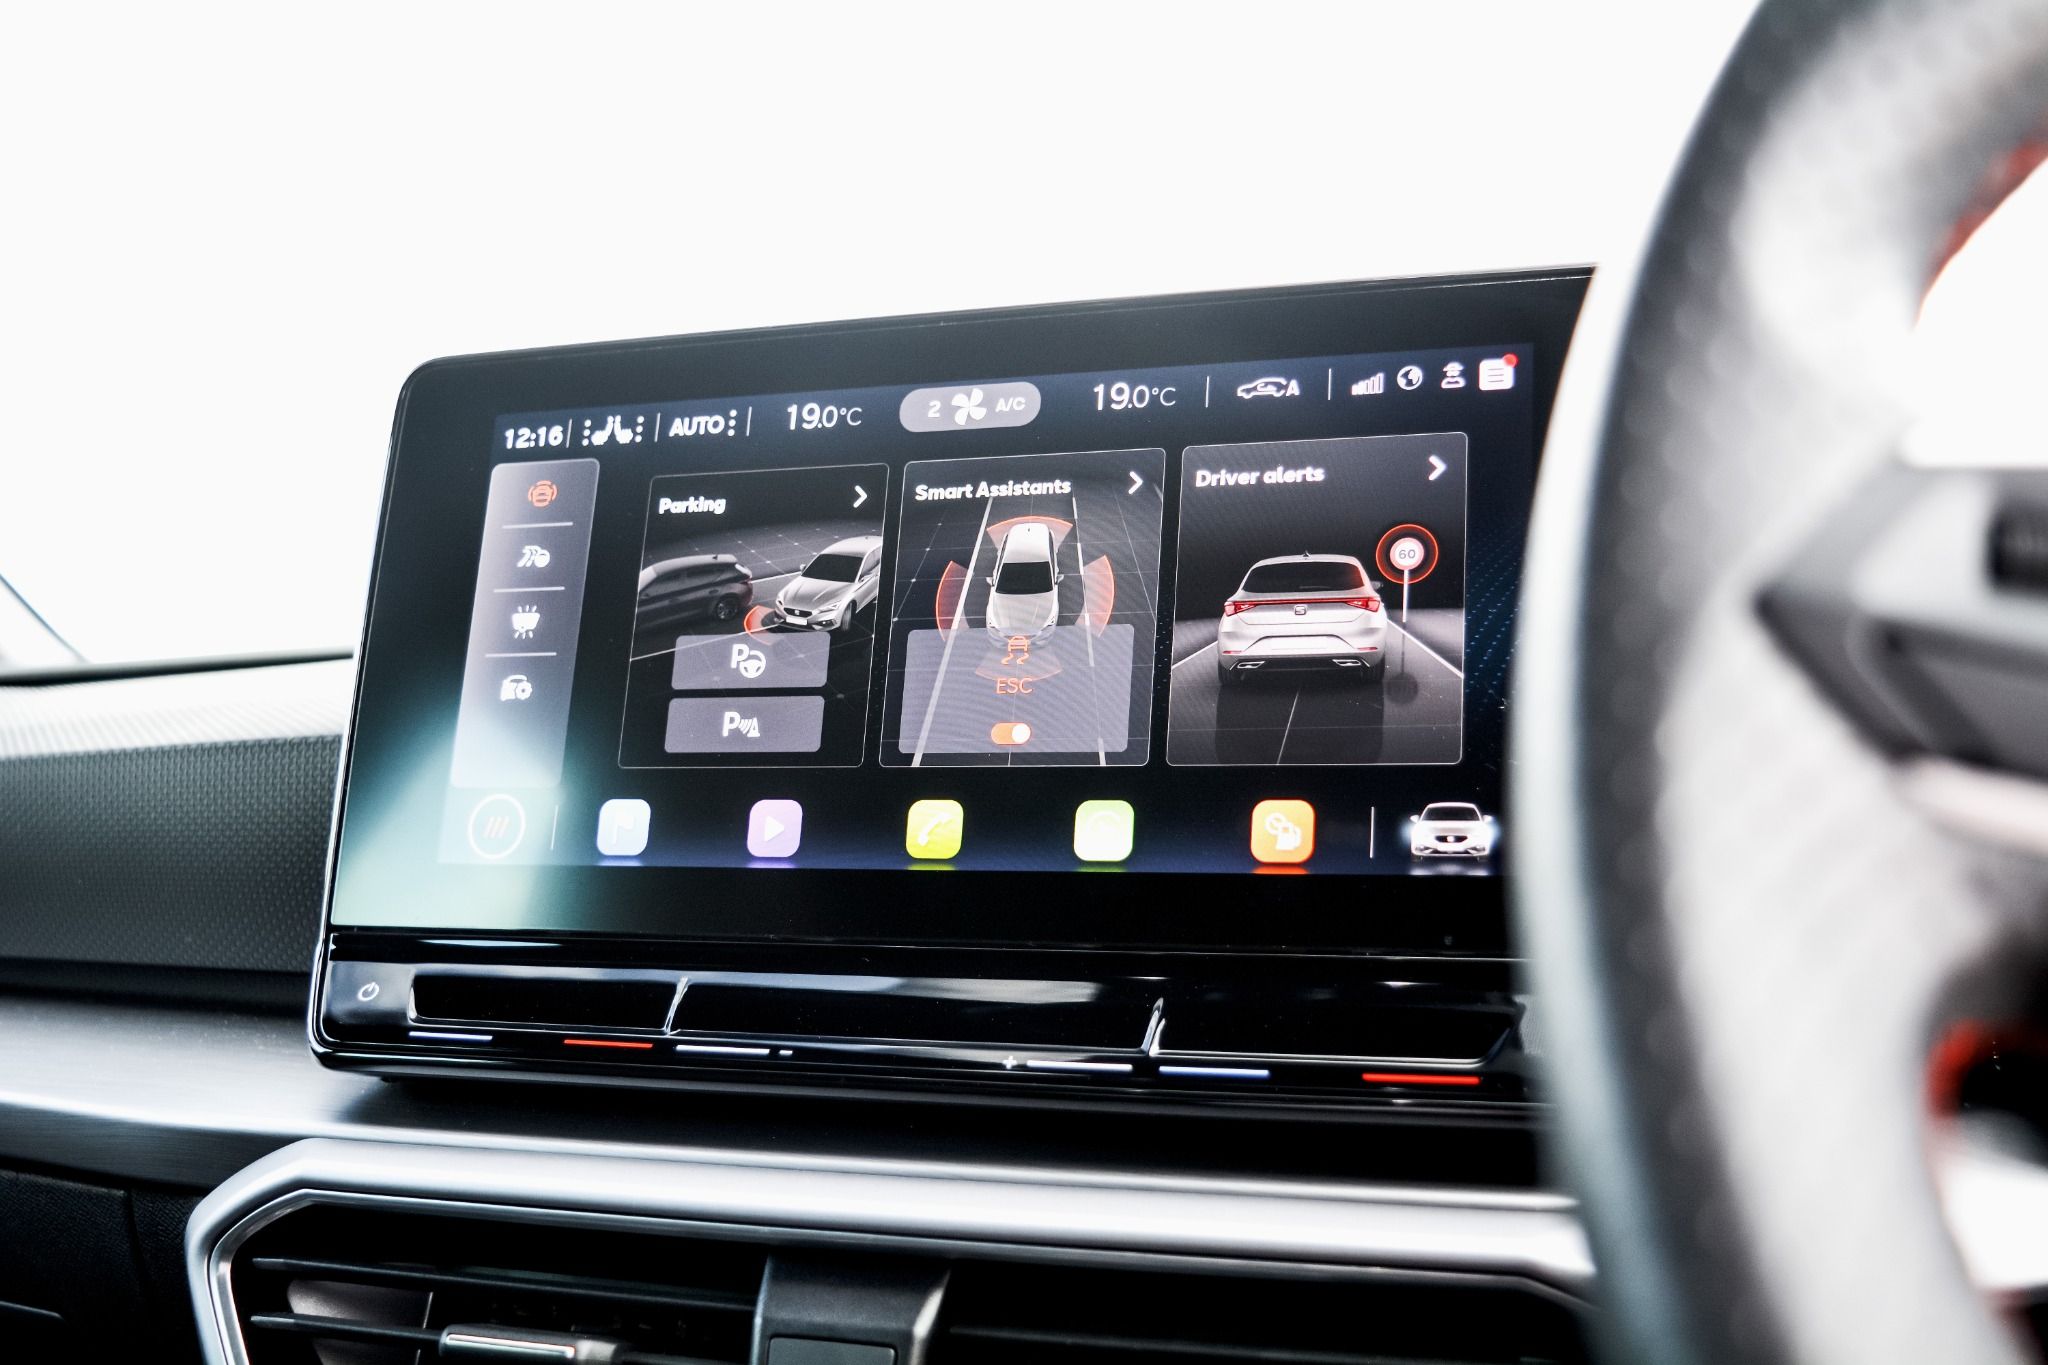 Close up view of infotainment screen inside SEAT Leon